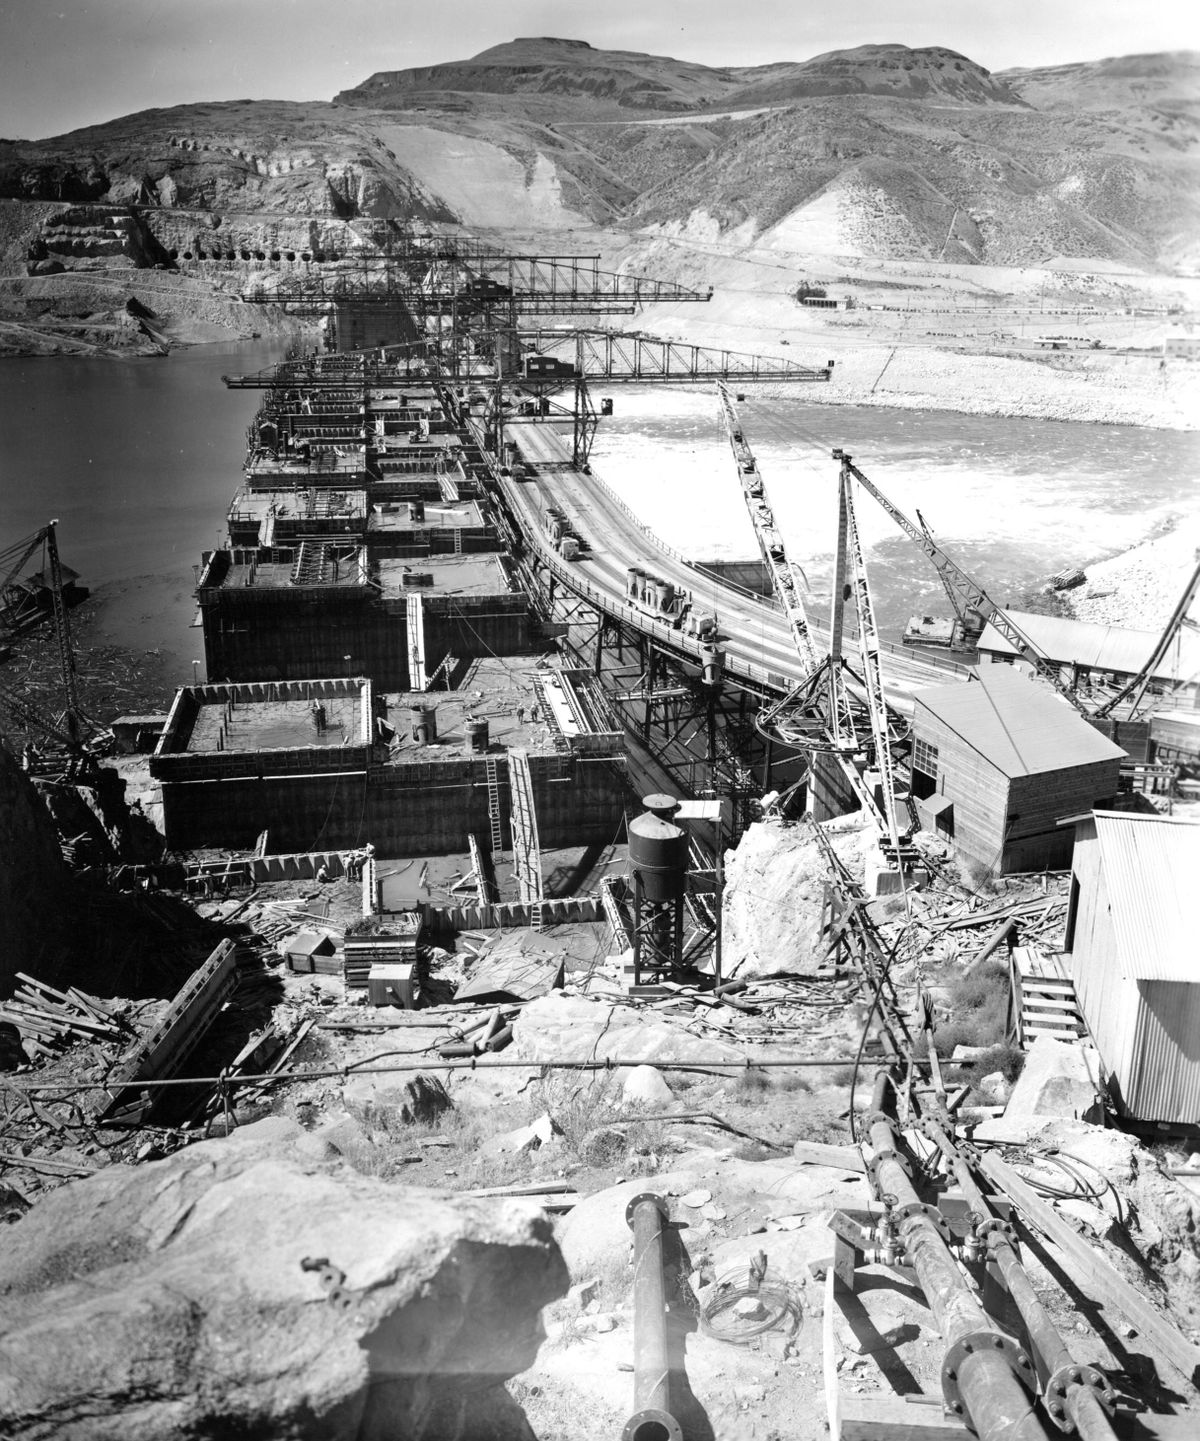 The construction of the Grand Coulee Dam in the 1930s created jobs, electricity and irrigation for the Inland Northwest. (Courtesy of Consolidated Builders Inc.)